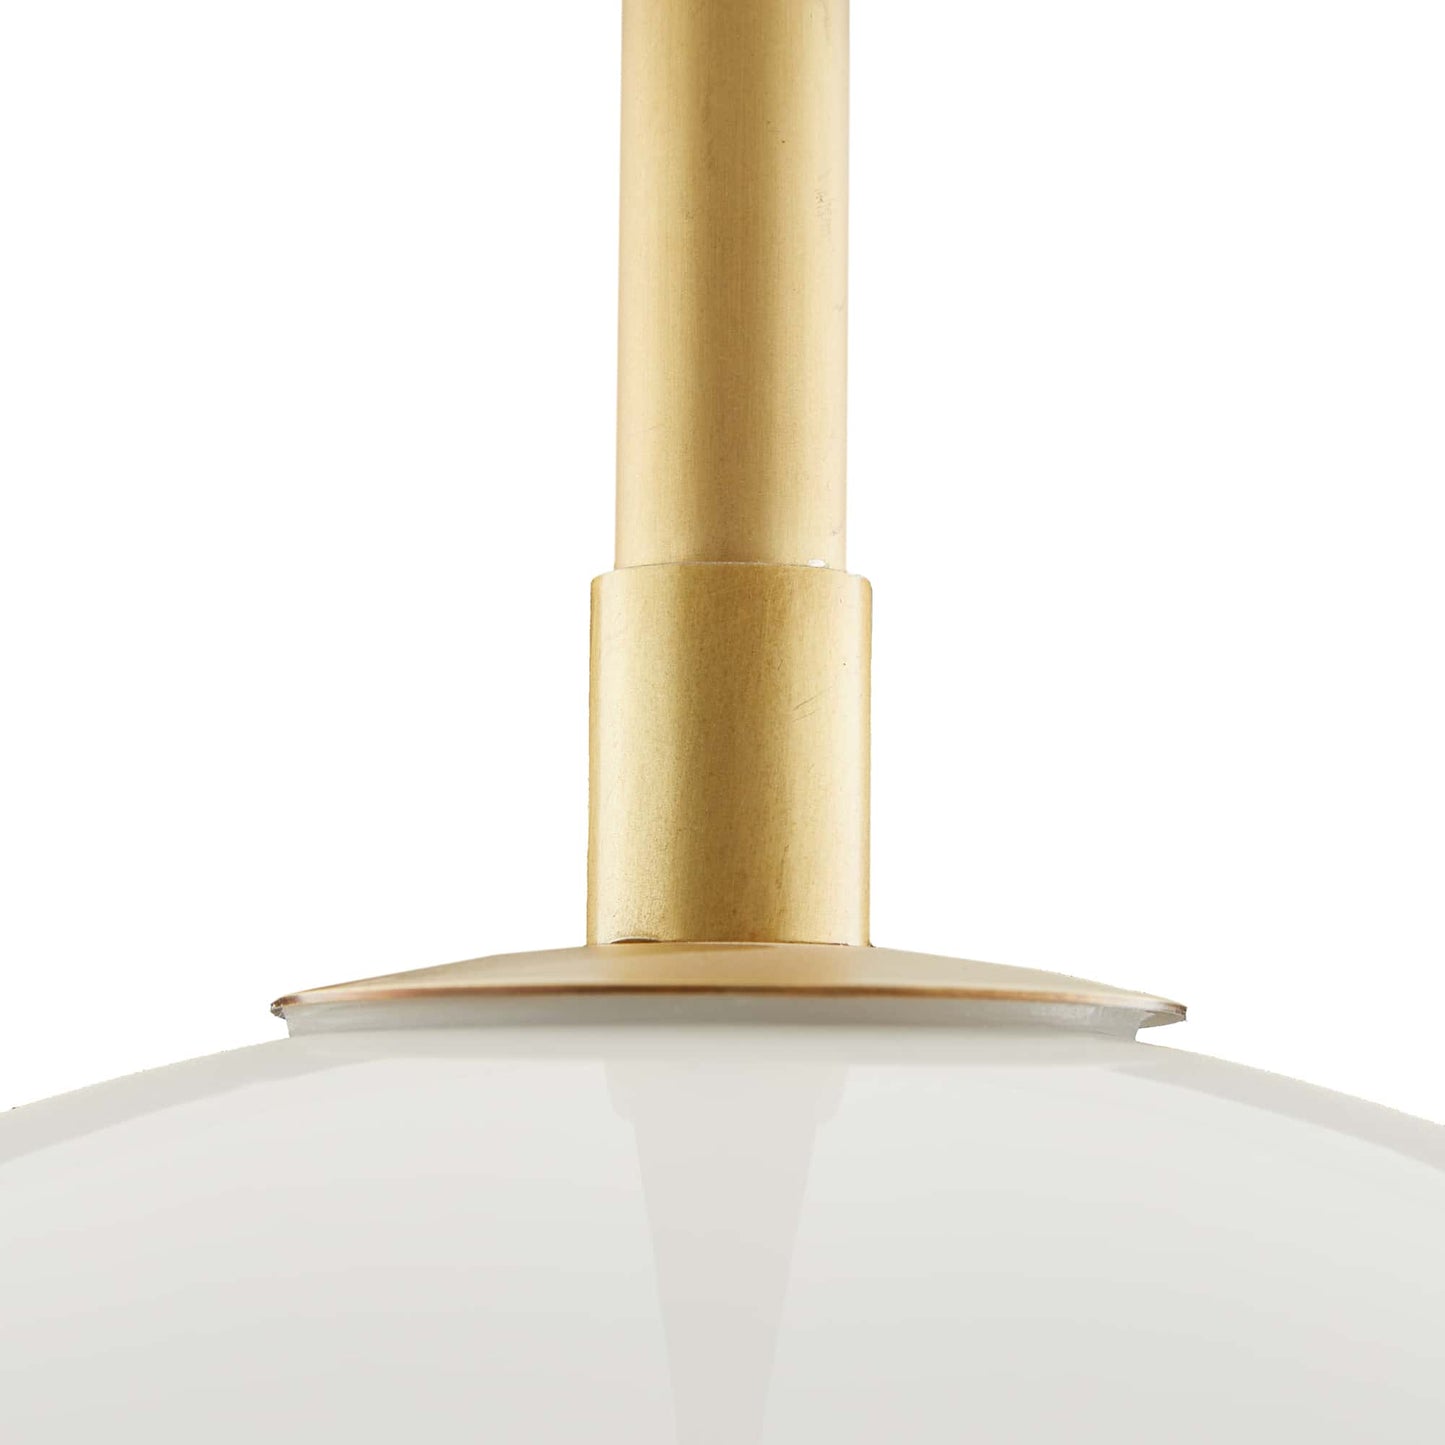 Elegant Somerville Pendant Light - Opal Glass with Antique Brass Pipes - Damp-Rated